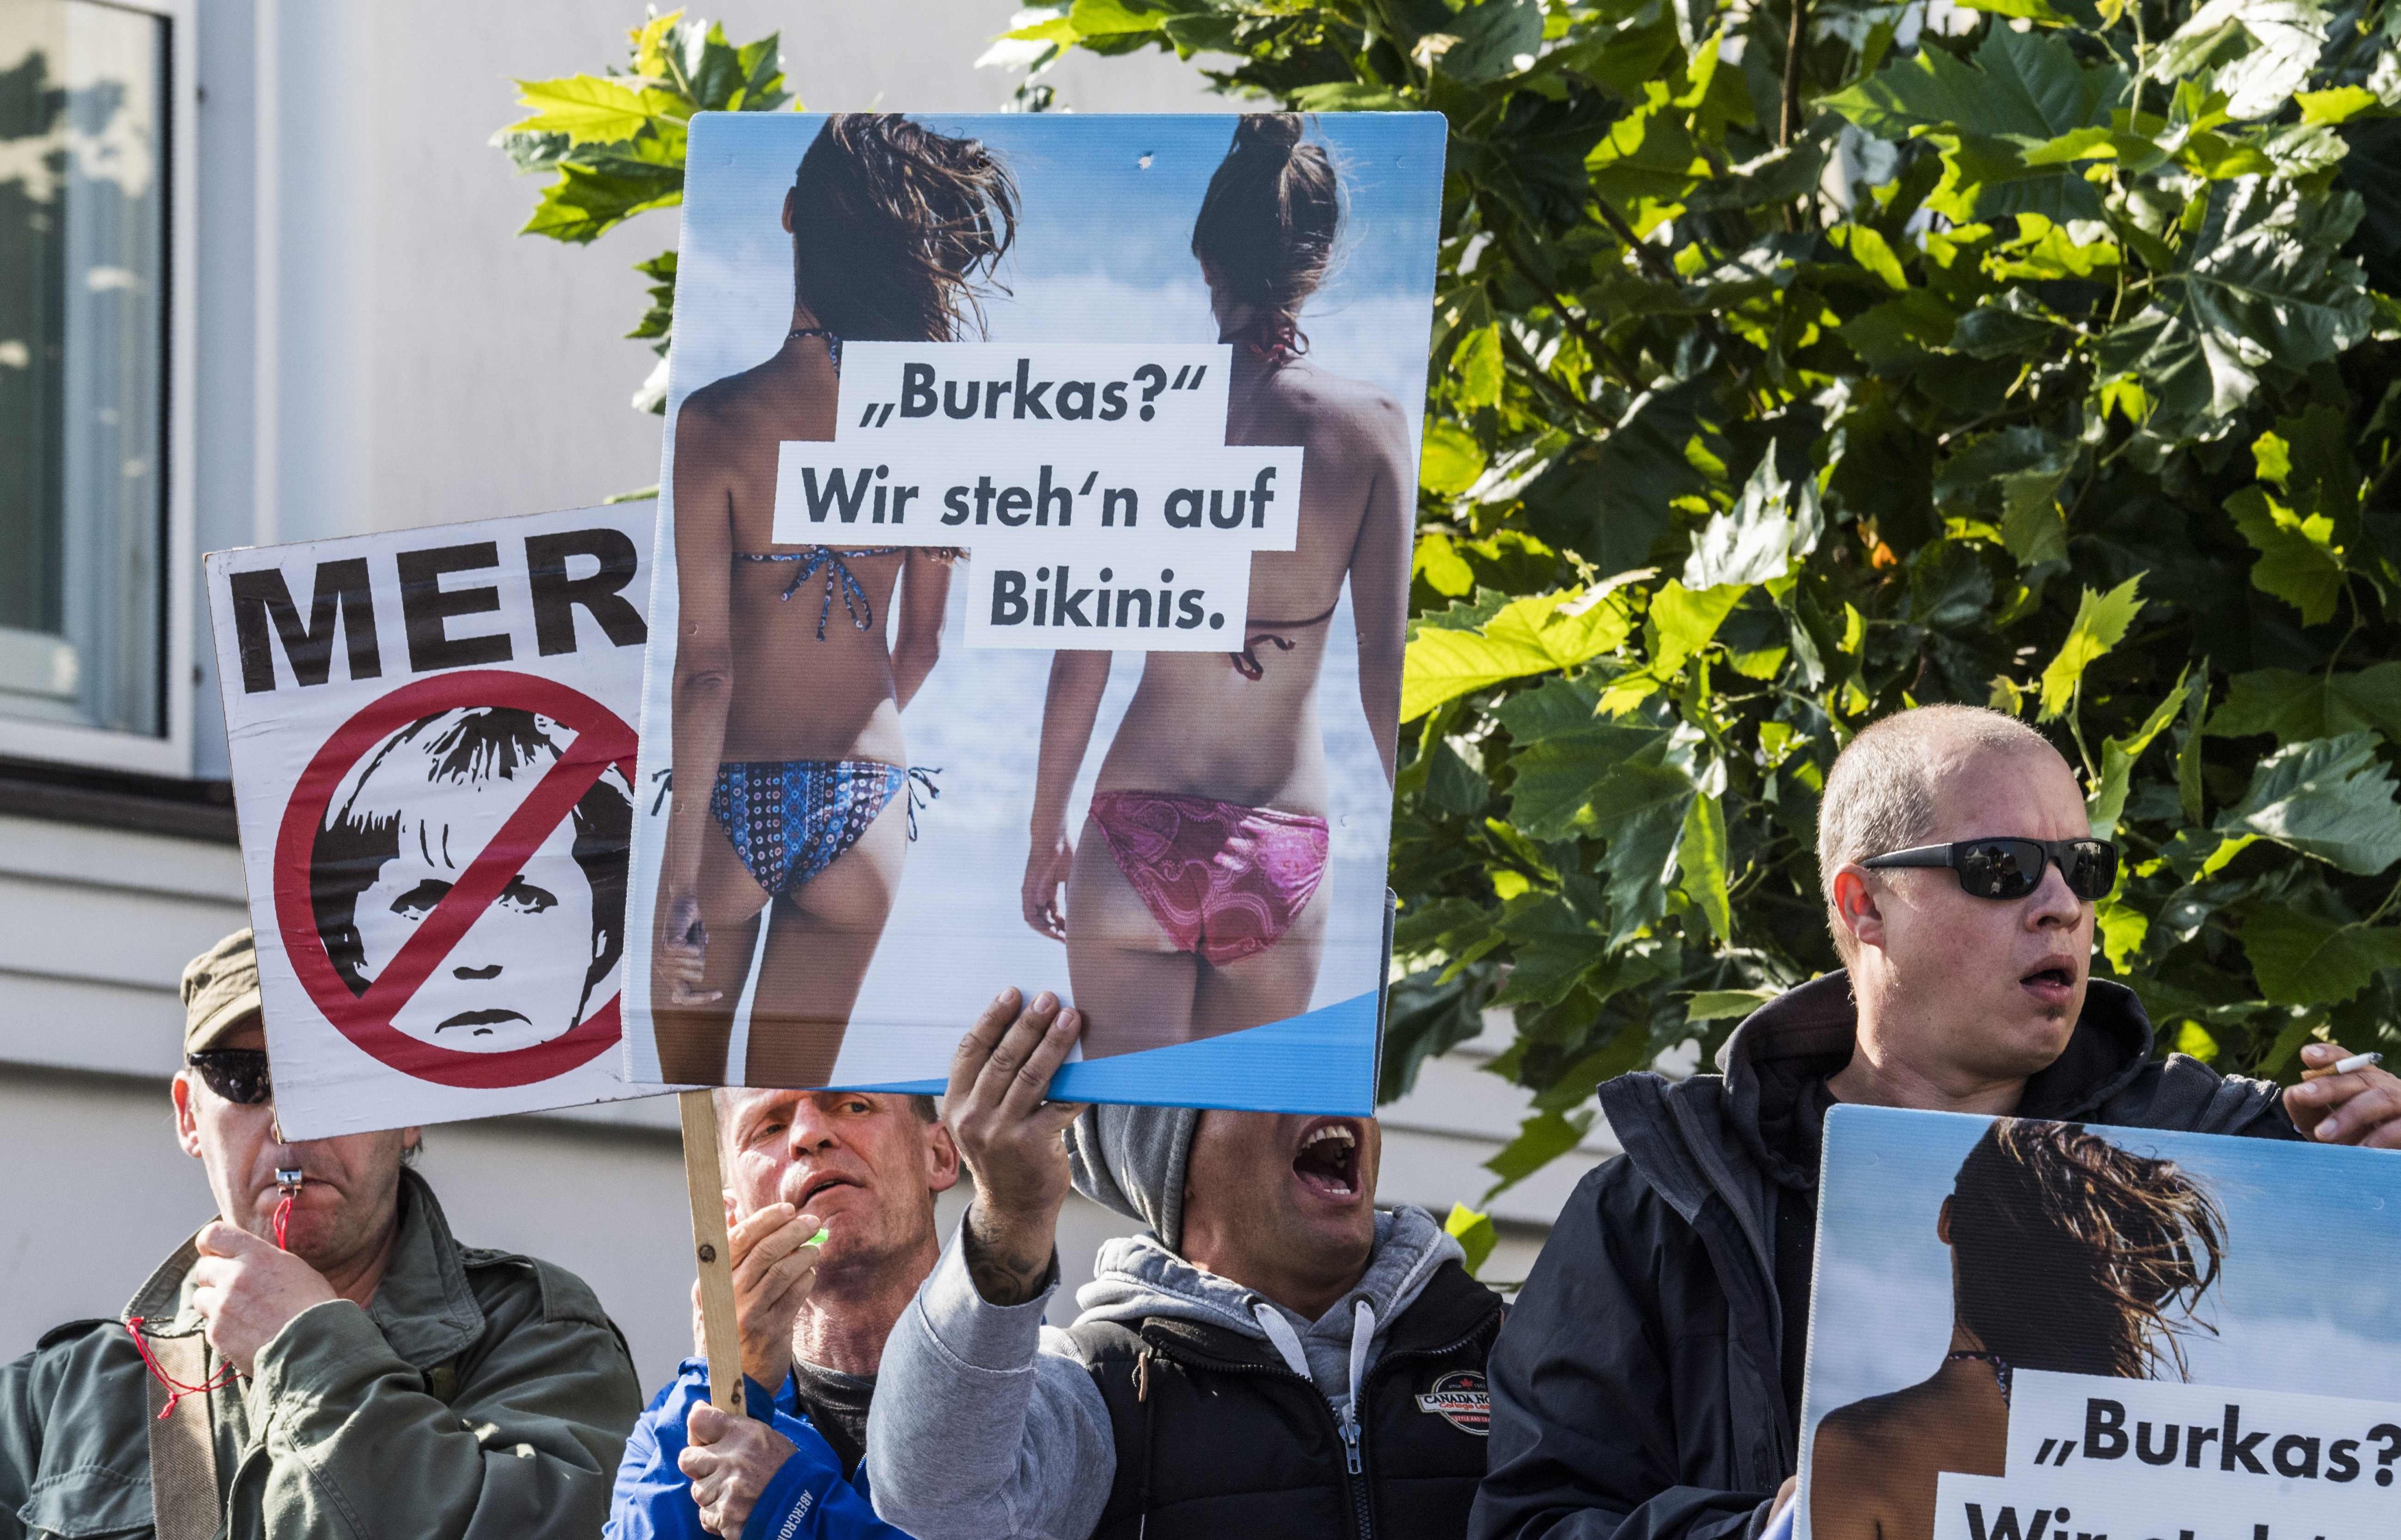 Members of the far-right, anti-immigrant Alternative for Germany display placards during a protest in Binz on September 16, 2017. The main placard reads: “Burkas? We prefer prefer bikinis.” Photo: AFP